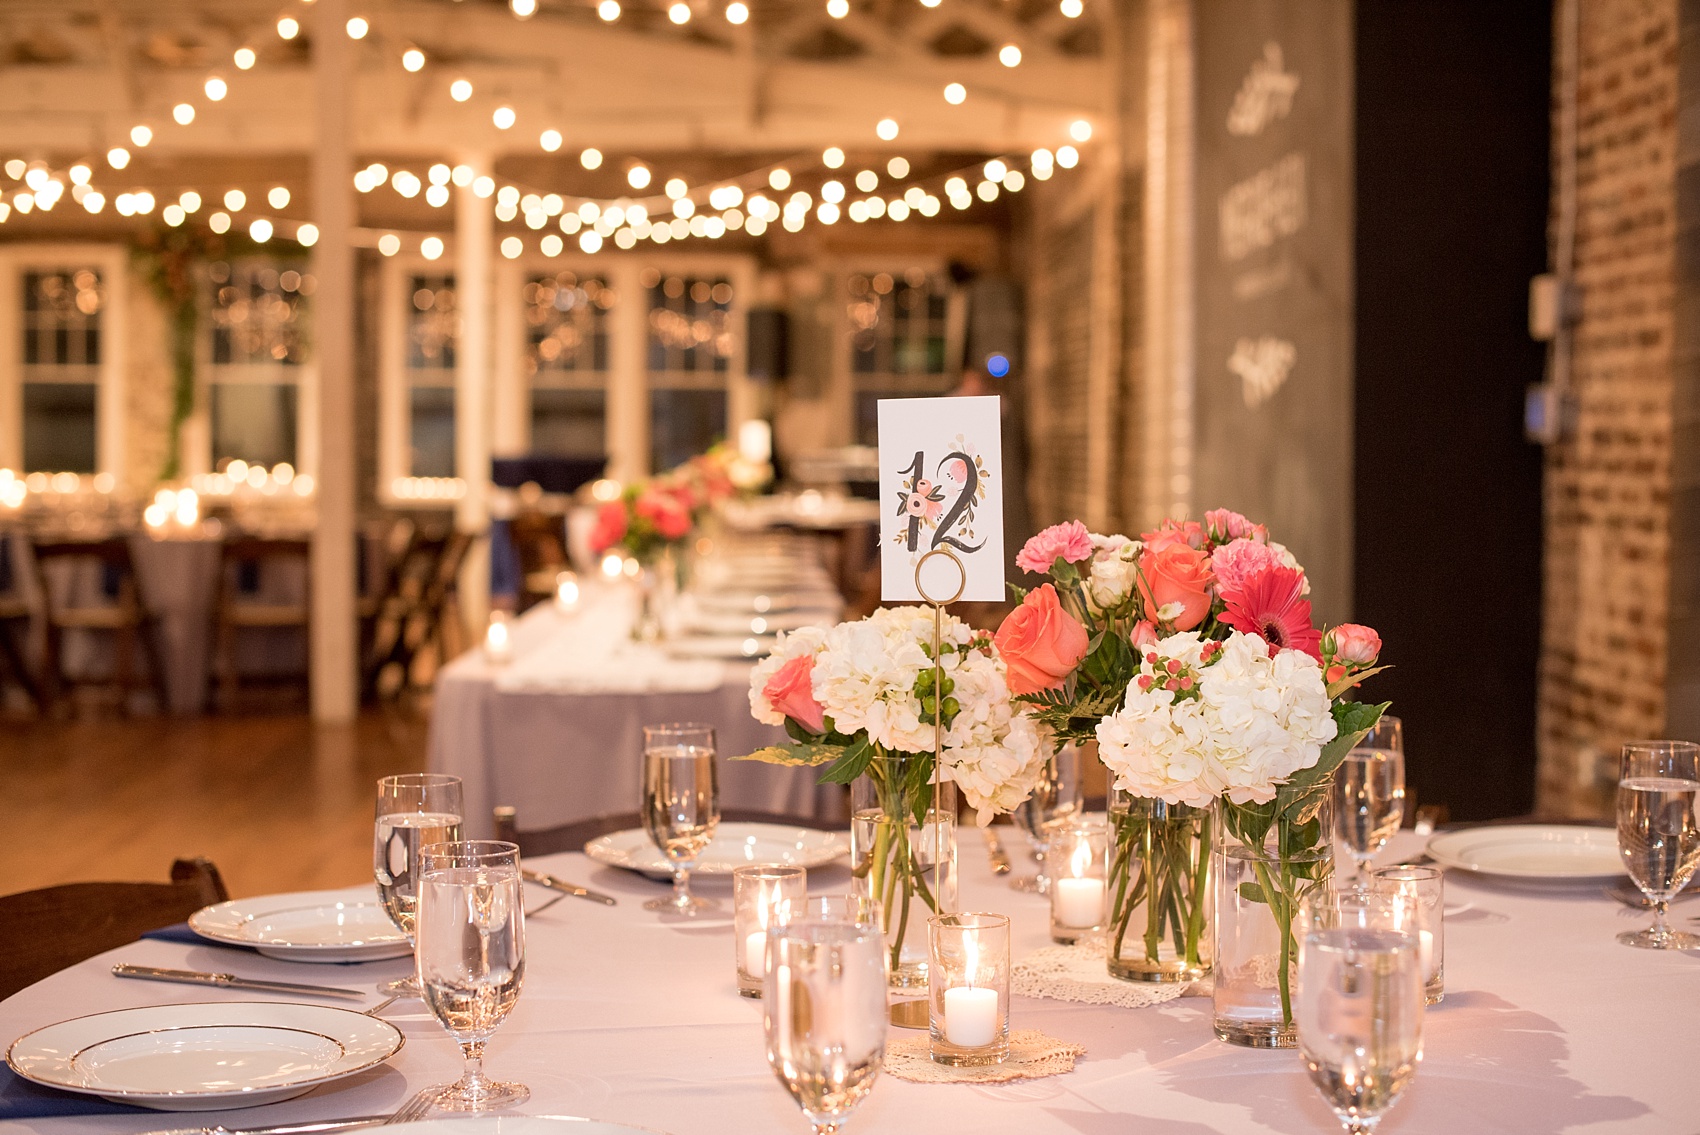 Mikkel Paige Photography photos from a wedding reception at The Stockroom at 230 in Raleigh. A picture of the centerpieces with green, white and coral flowers and Rifle Paper Co table numbers.